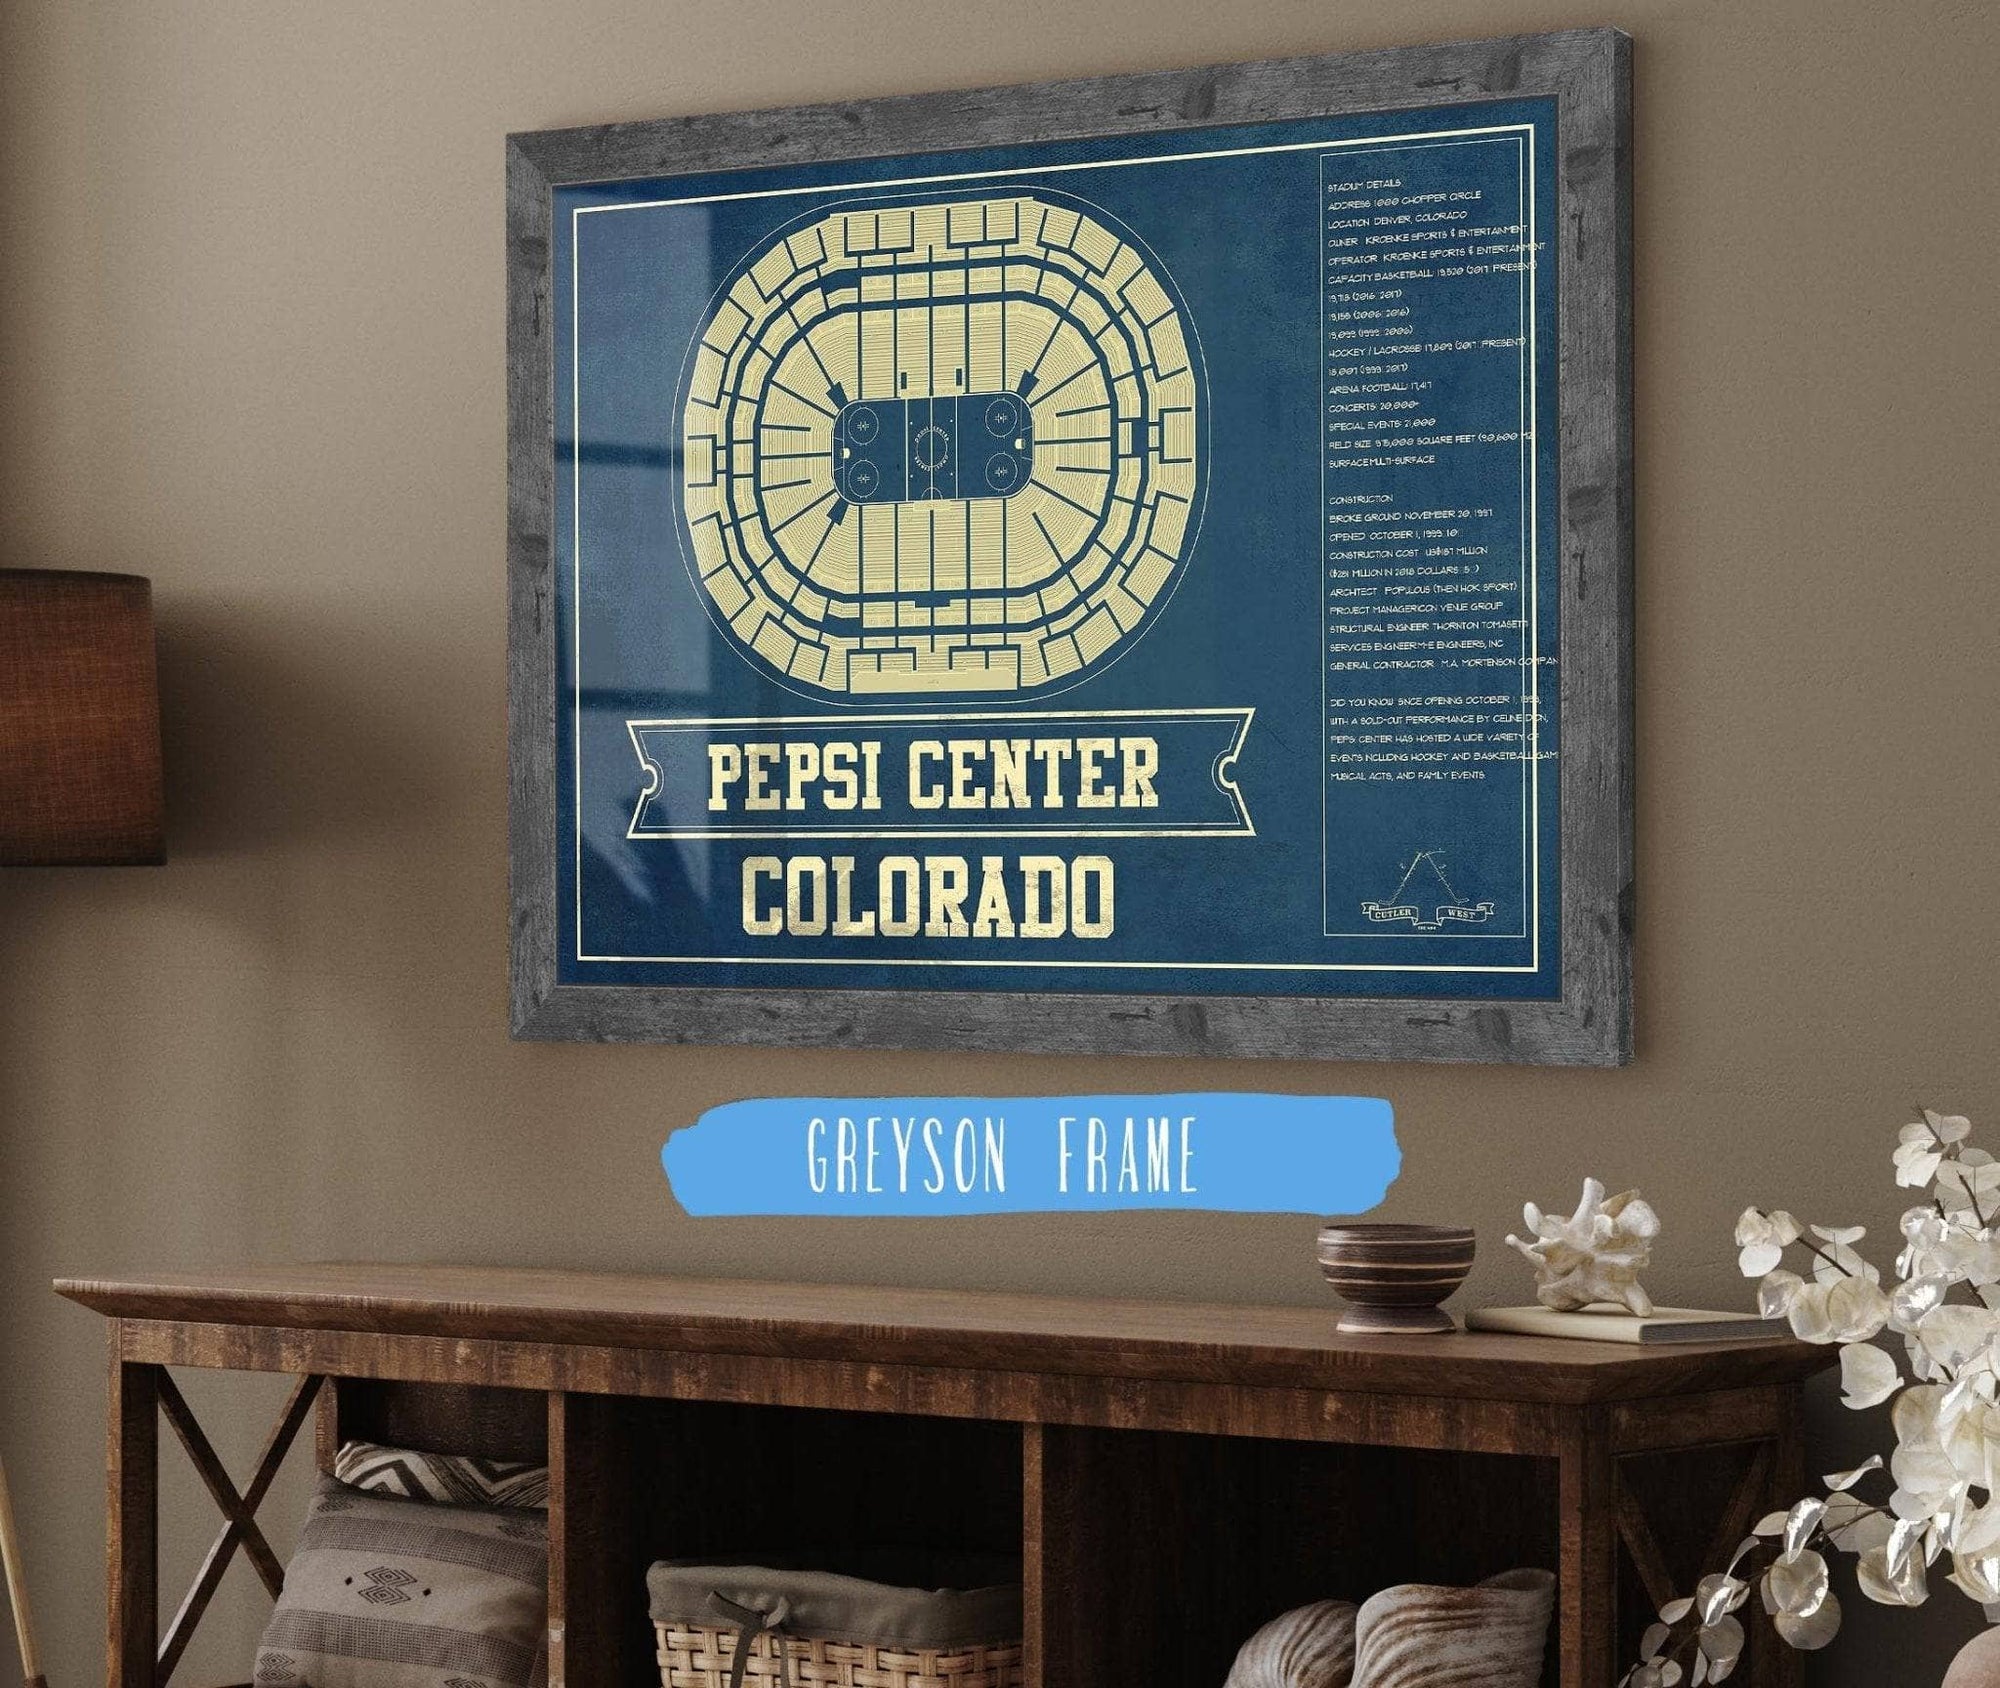 Cutler West Colorado Avalanche Pepsi Center Seating Chart - Vintage Hockey Print